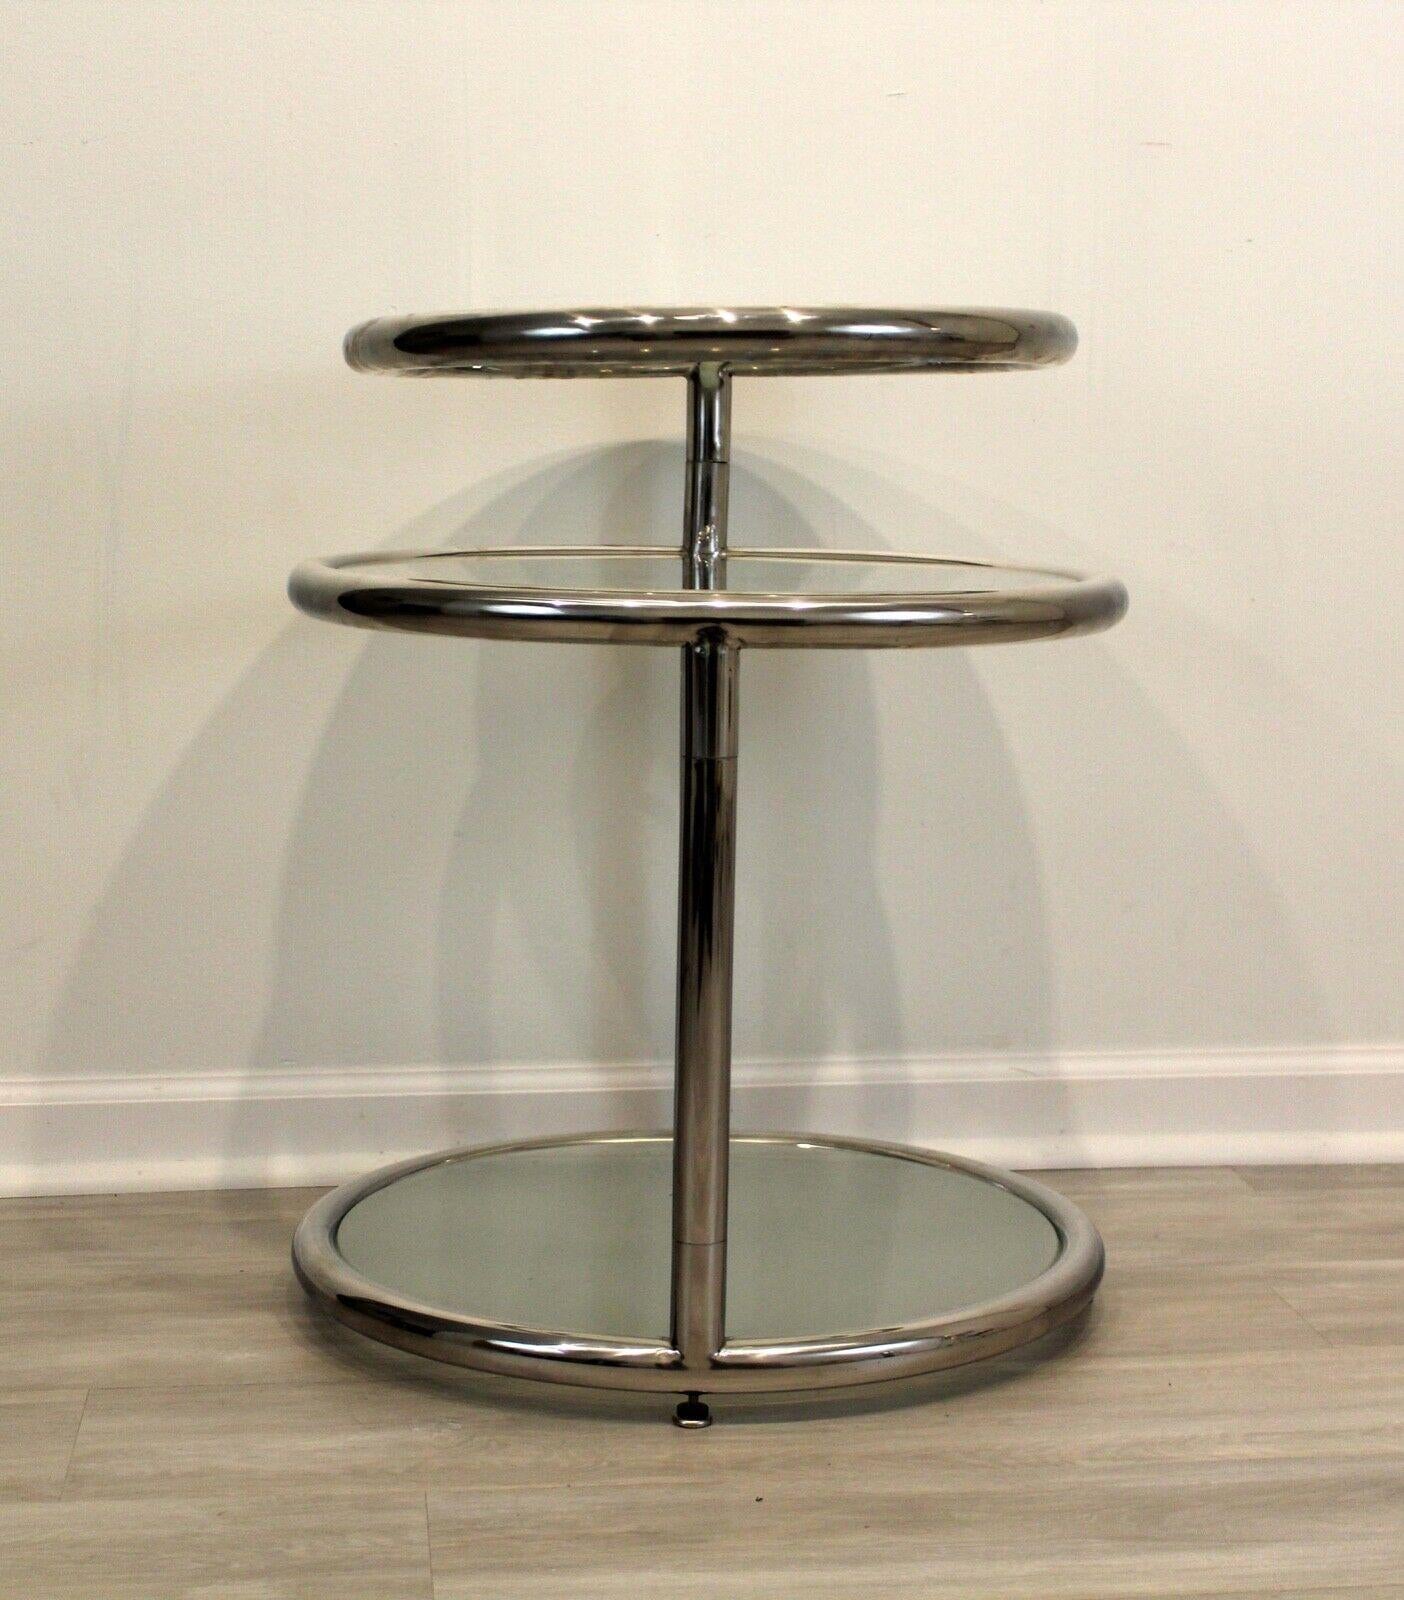 This lovely chrome and glass side table is as functional as it is sophisticated. With 3 tiers that swivel for storage, 

Dimensions: 21 diameter x 25 height.